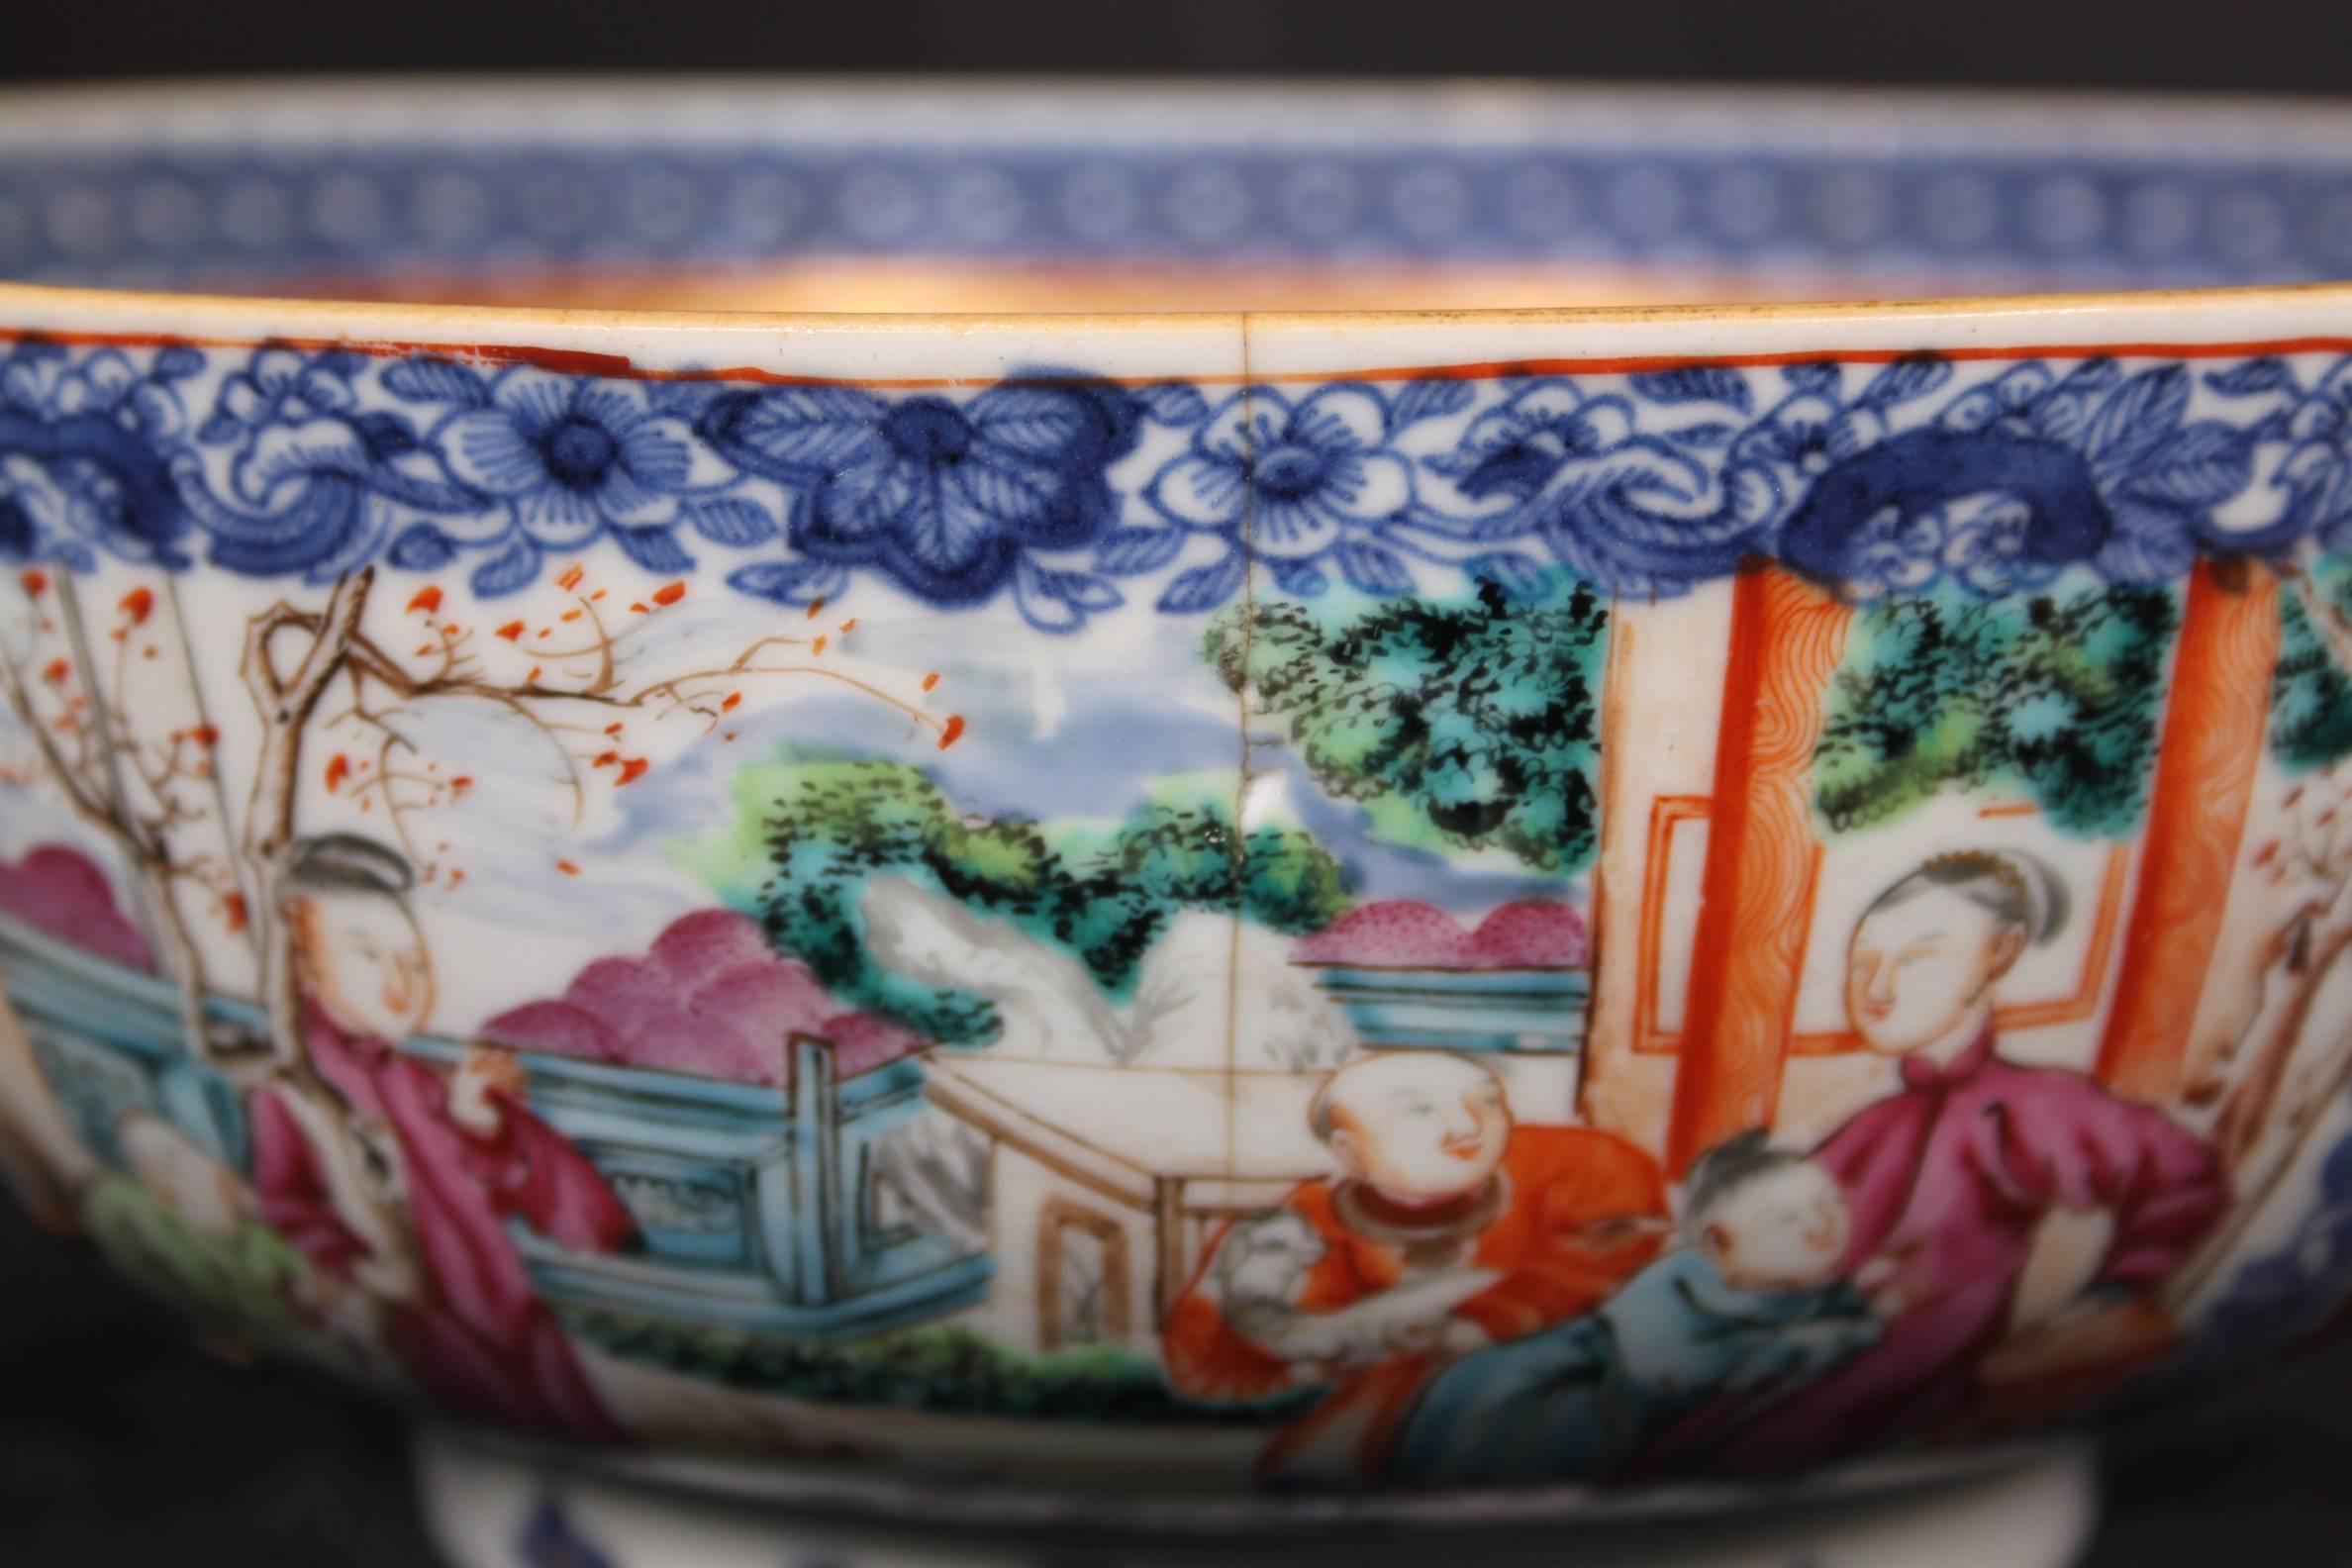 18th Century (1770-1780) Chinese Punchbowl of the Qing Dynasty in the typical Mandarin Palette and style depicting a court scene with rare motifs of dogs. Very well painted scenes and carefully detailed elements. Condition: Fair, however has had